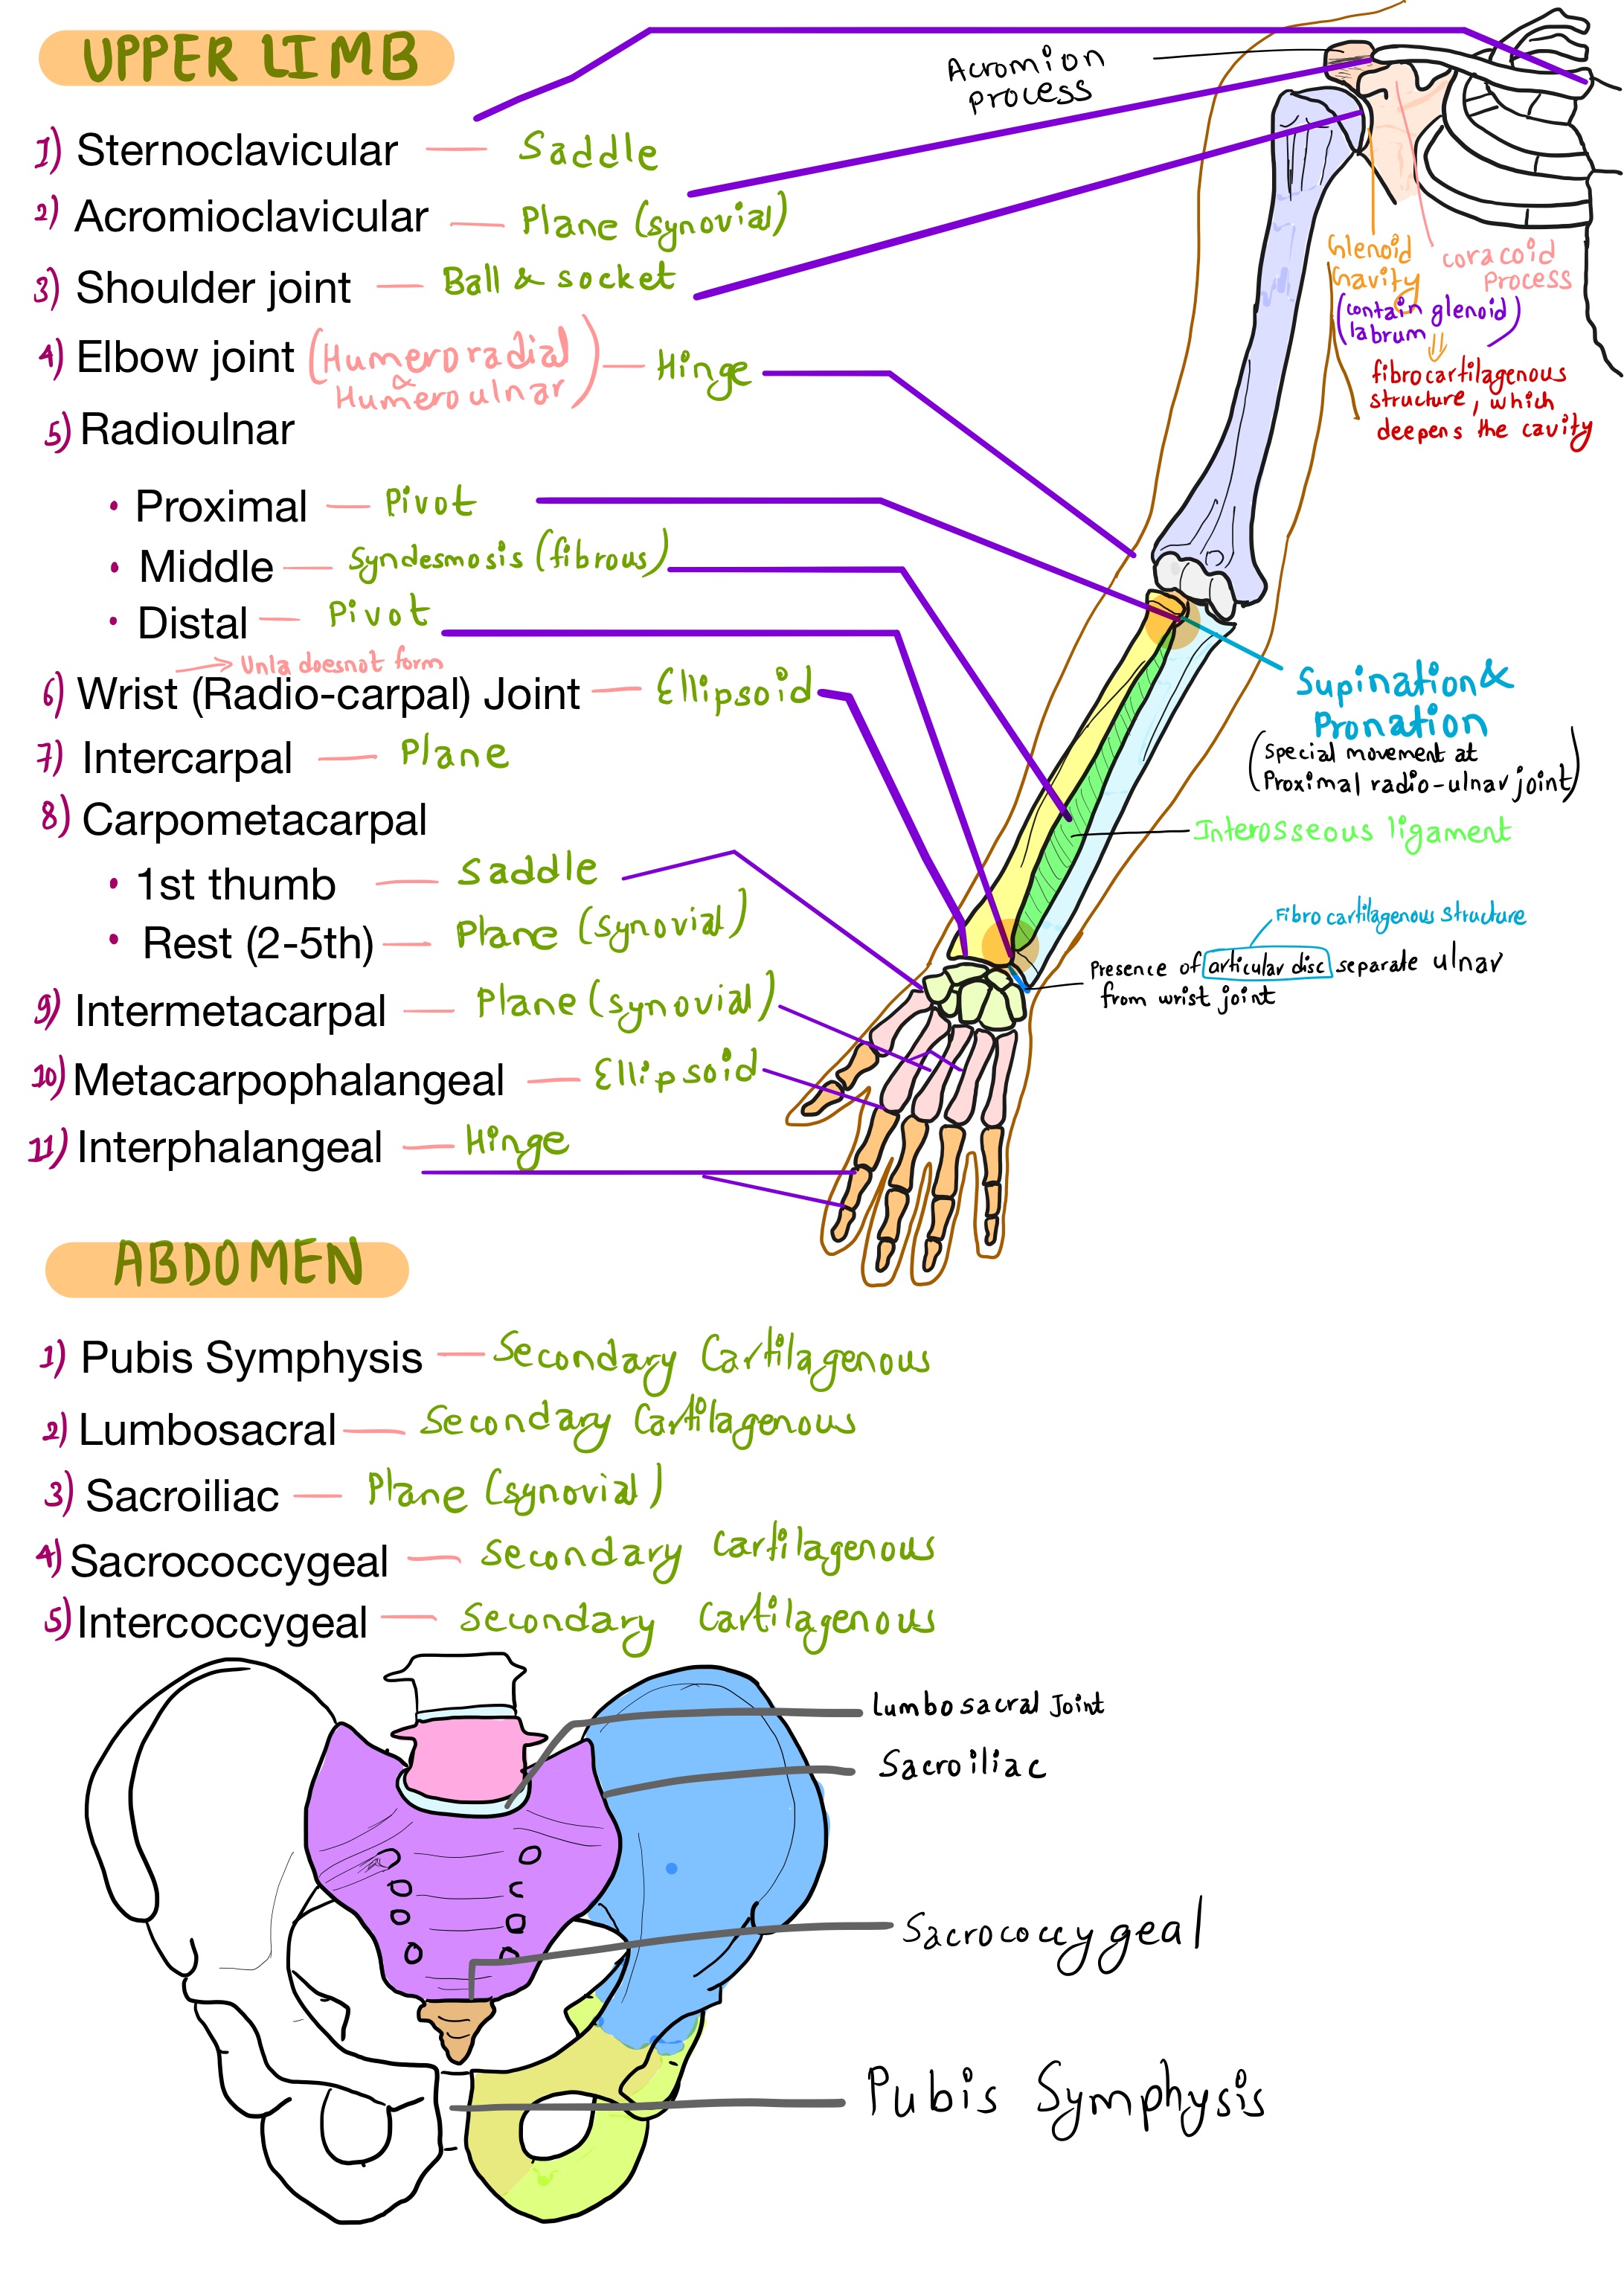 Joints of upper limb and joints types